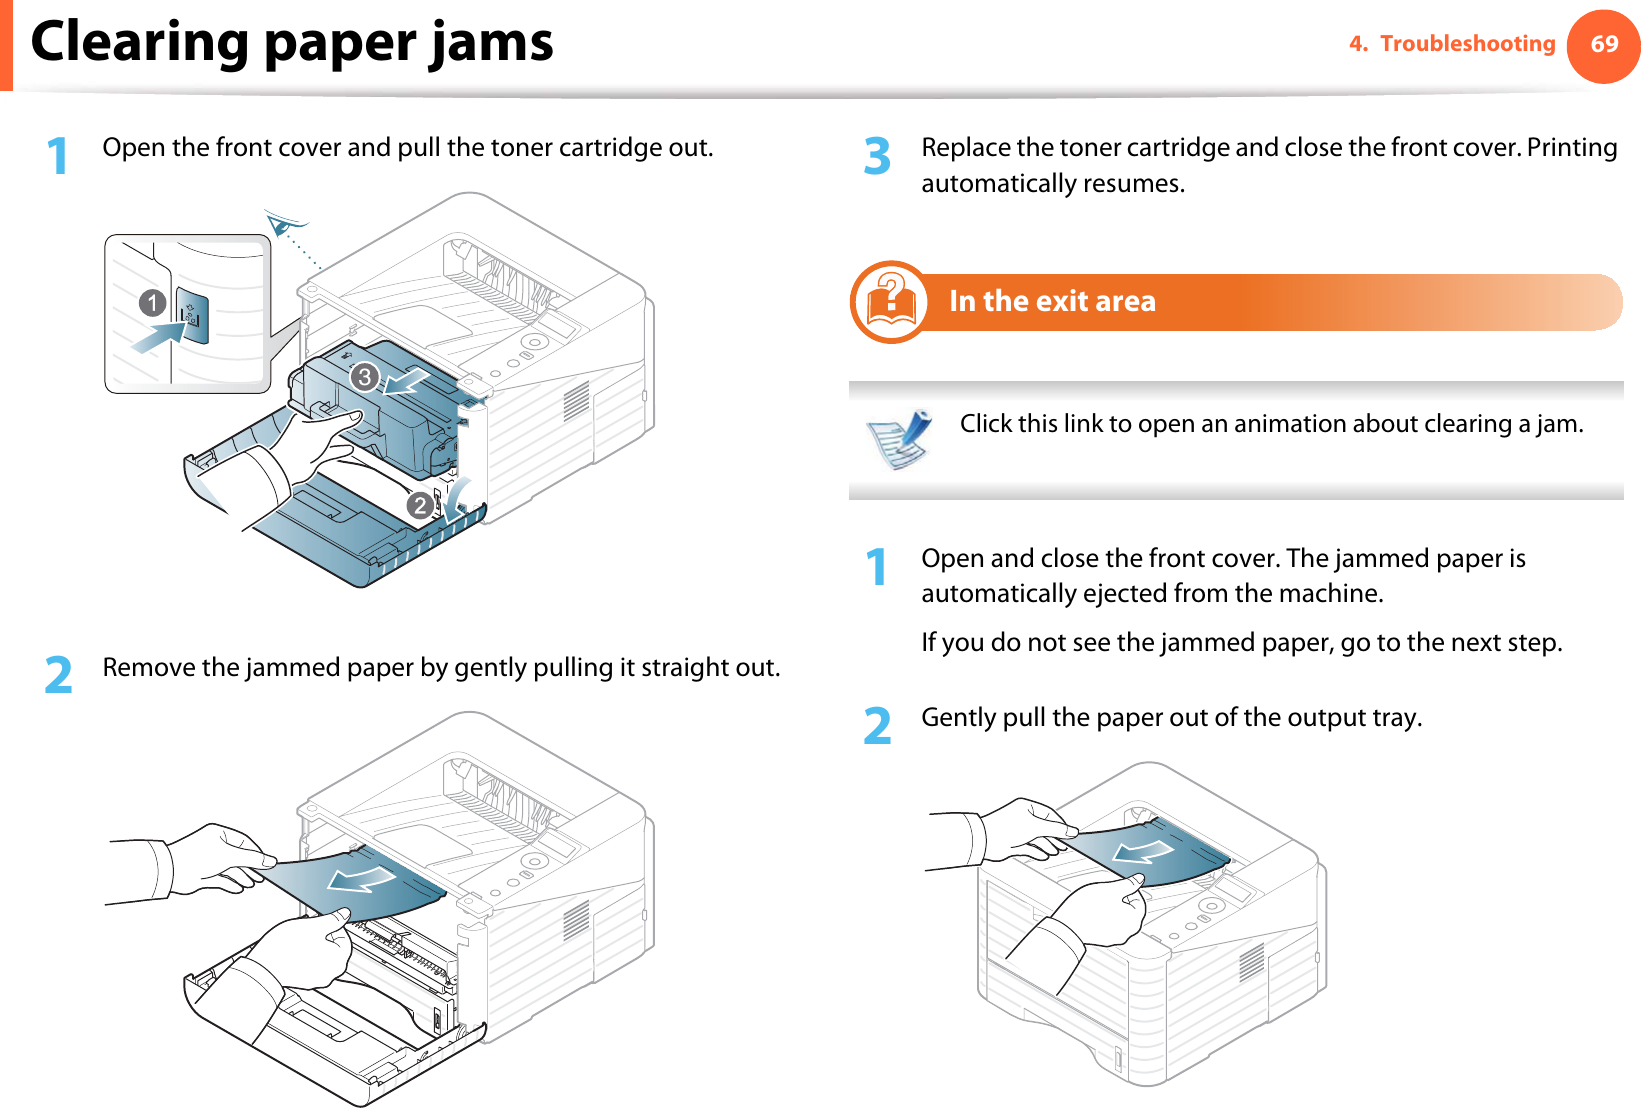 Clearing paper jams 694. Troubleshooting1Open the front cover and pull the toner cartridge out.2  Remove the jammed paper by gently pulling it straight out.3  Replace the toner cartridge and close the front cover. Printing automatically resumes.5In the exit area Click this link to open an animation about clearing a jam. 1Open and close the front cover. The jammed paper is automatically ejected from the machine.If you do not see the jammed paper, go to the next step.2  Gently pull the paper out of the output tray.3